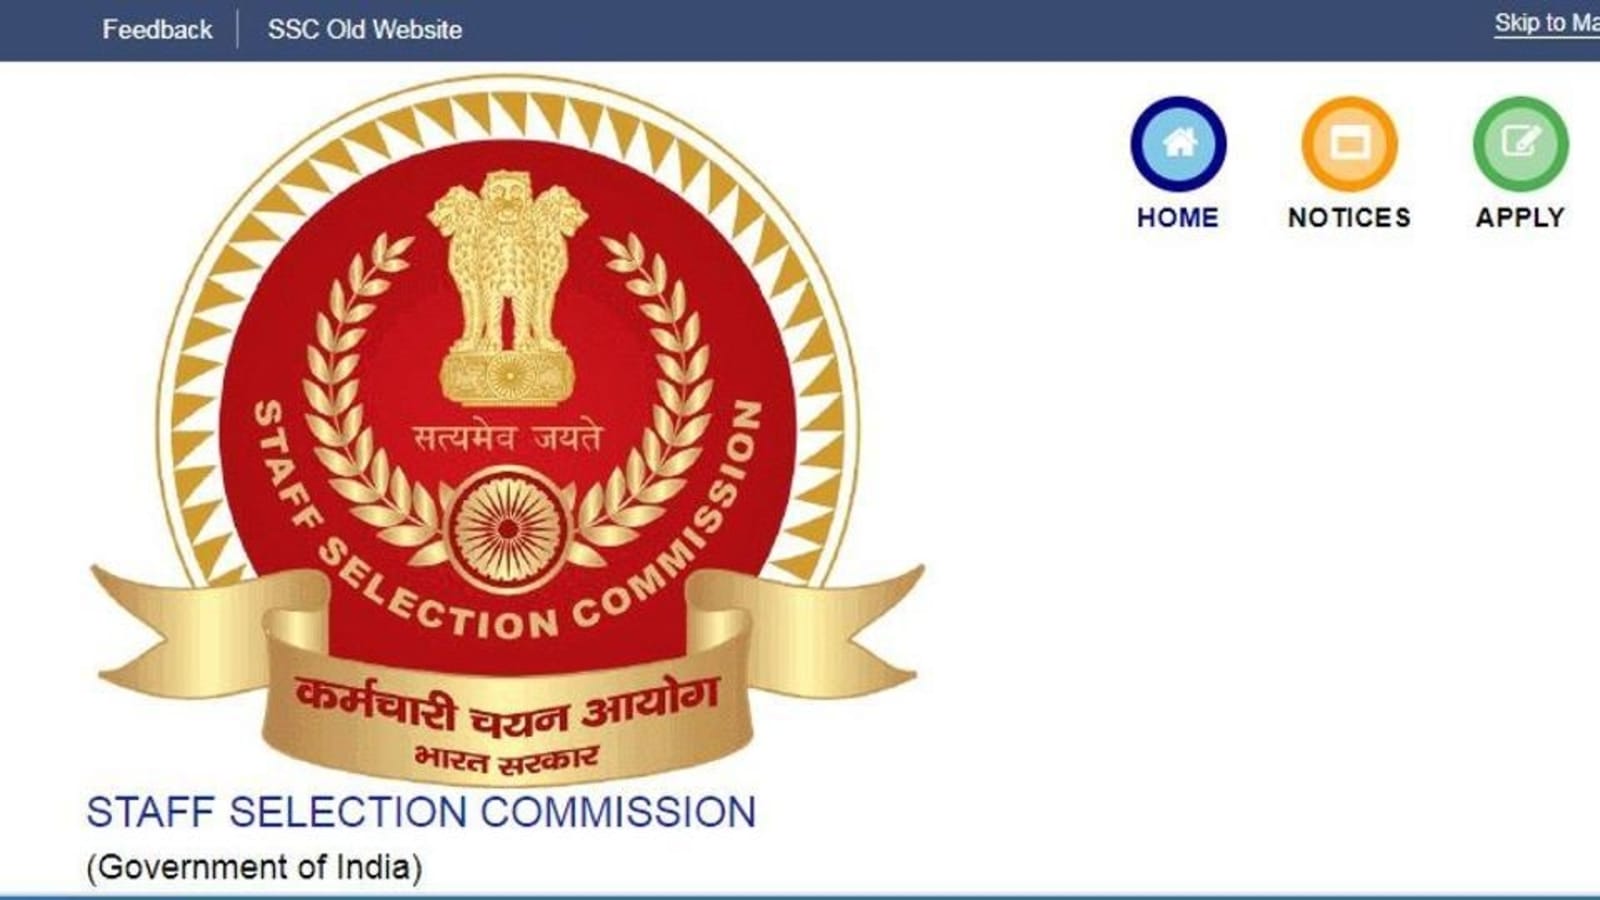 SSC Constable (GD) exam mock test link available, check now